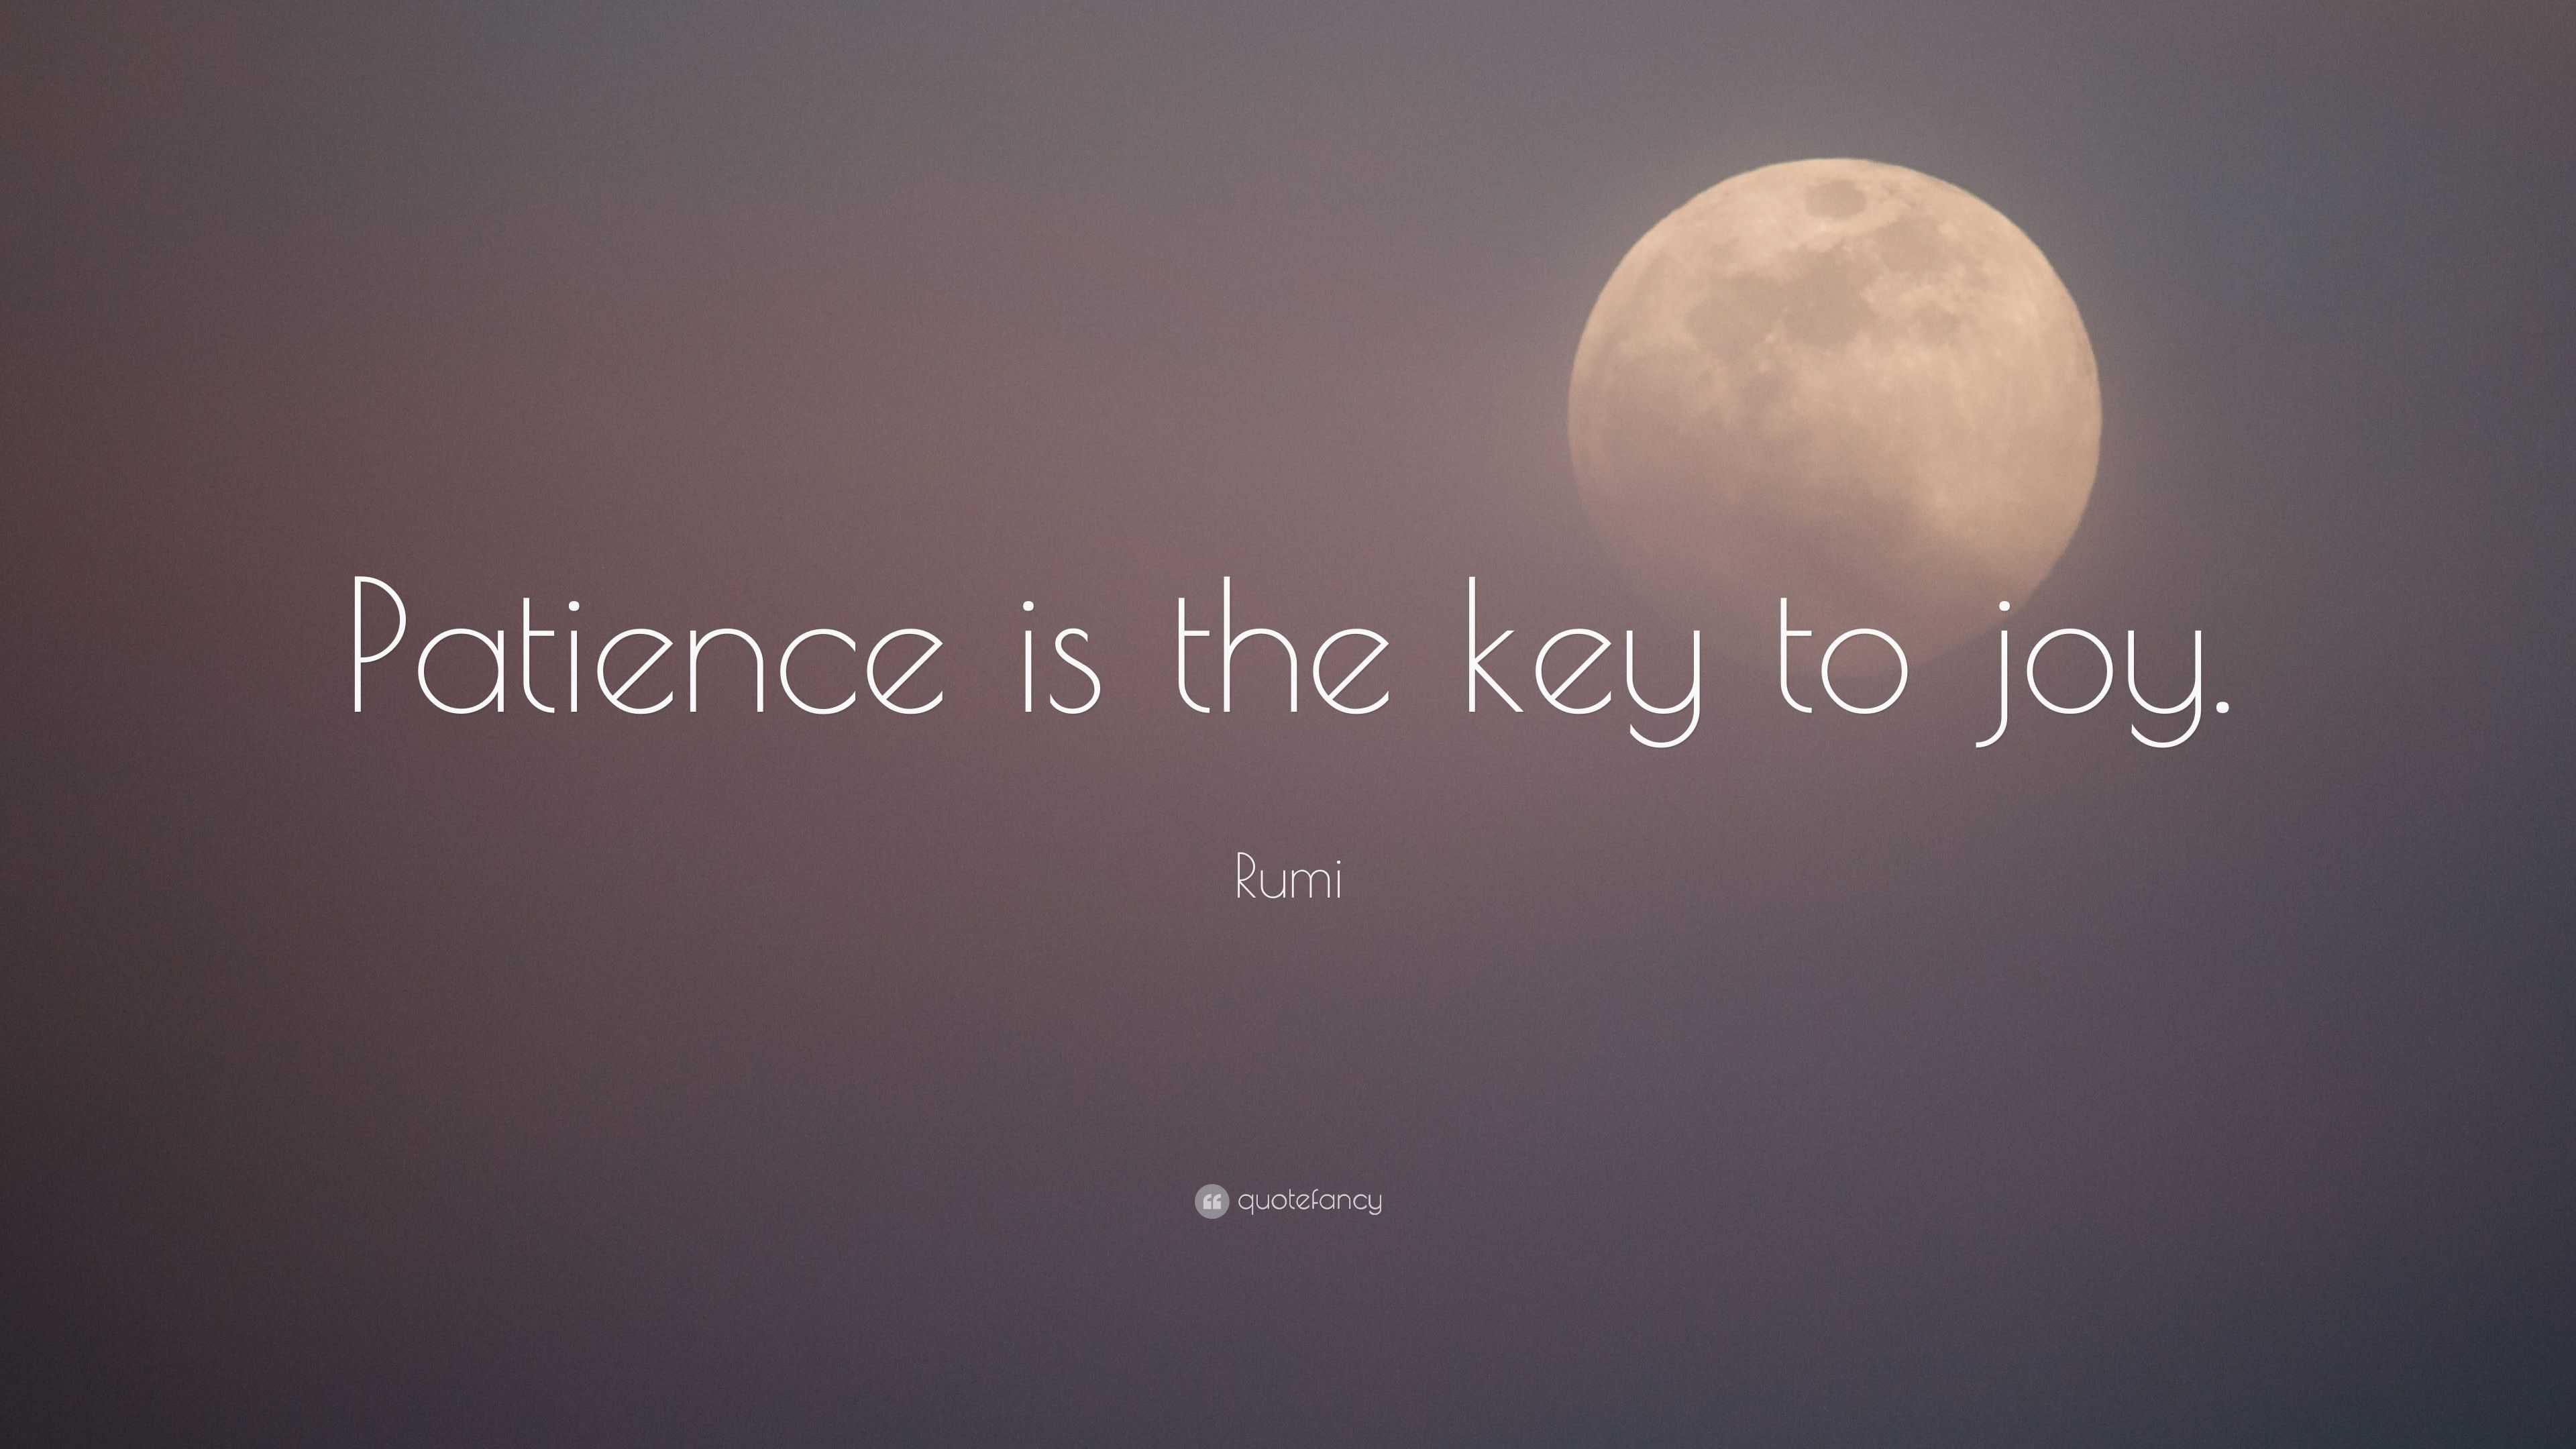 Rumi Quote: “Patience is the key to joy.” (12 wallpapers) - Quotefancy